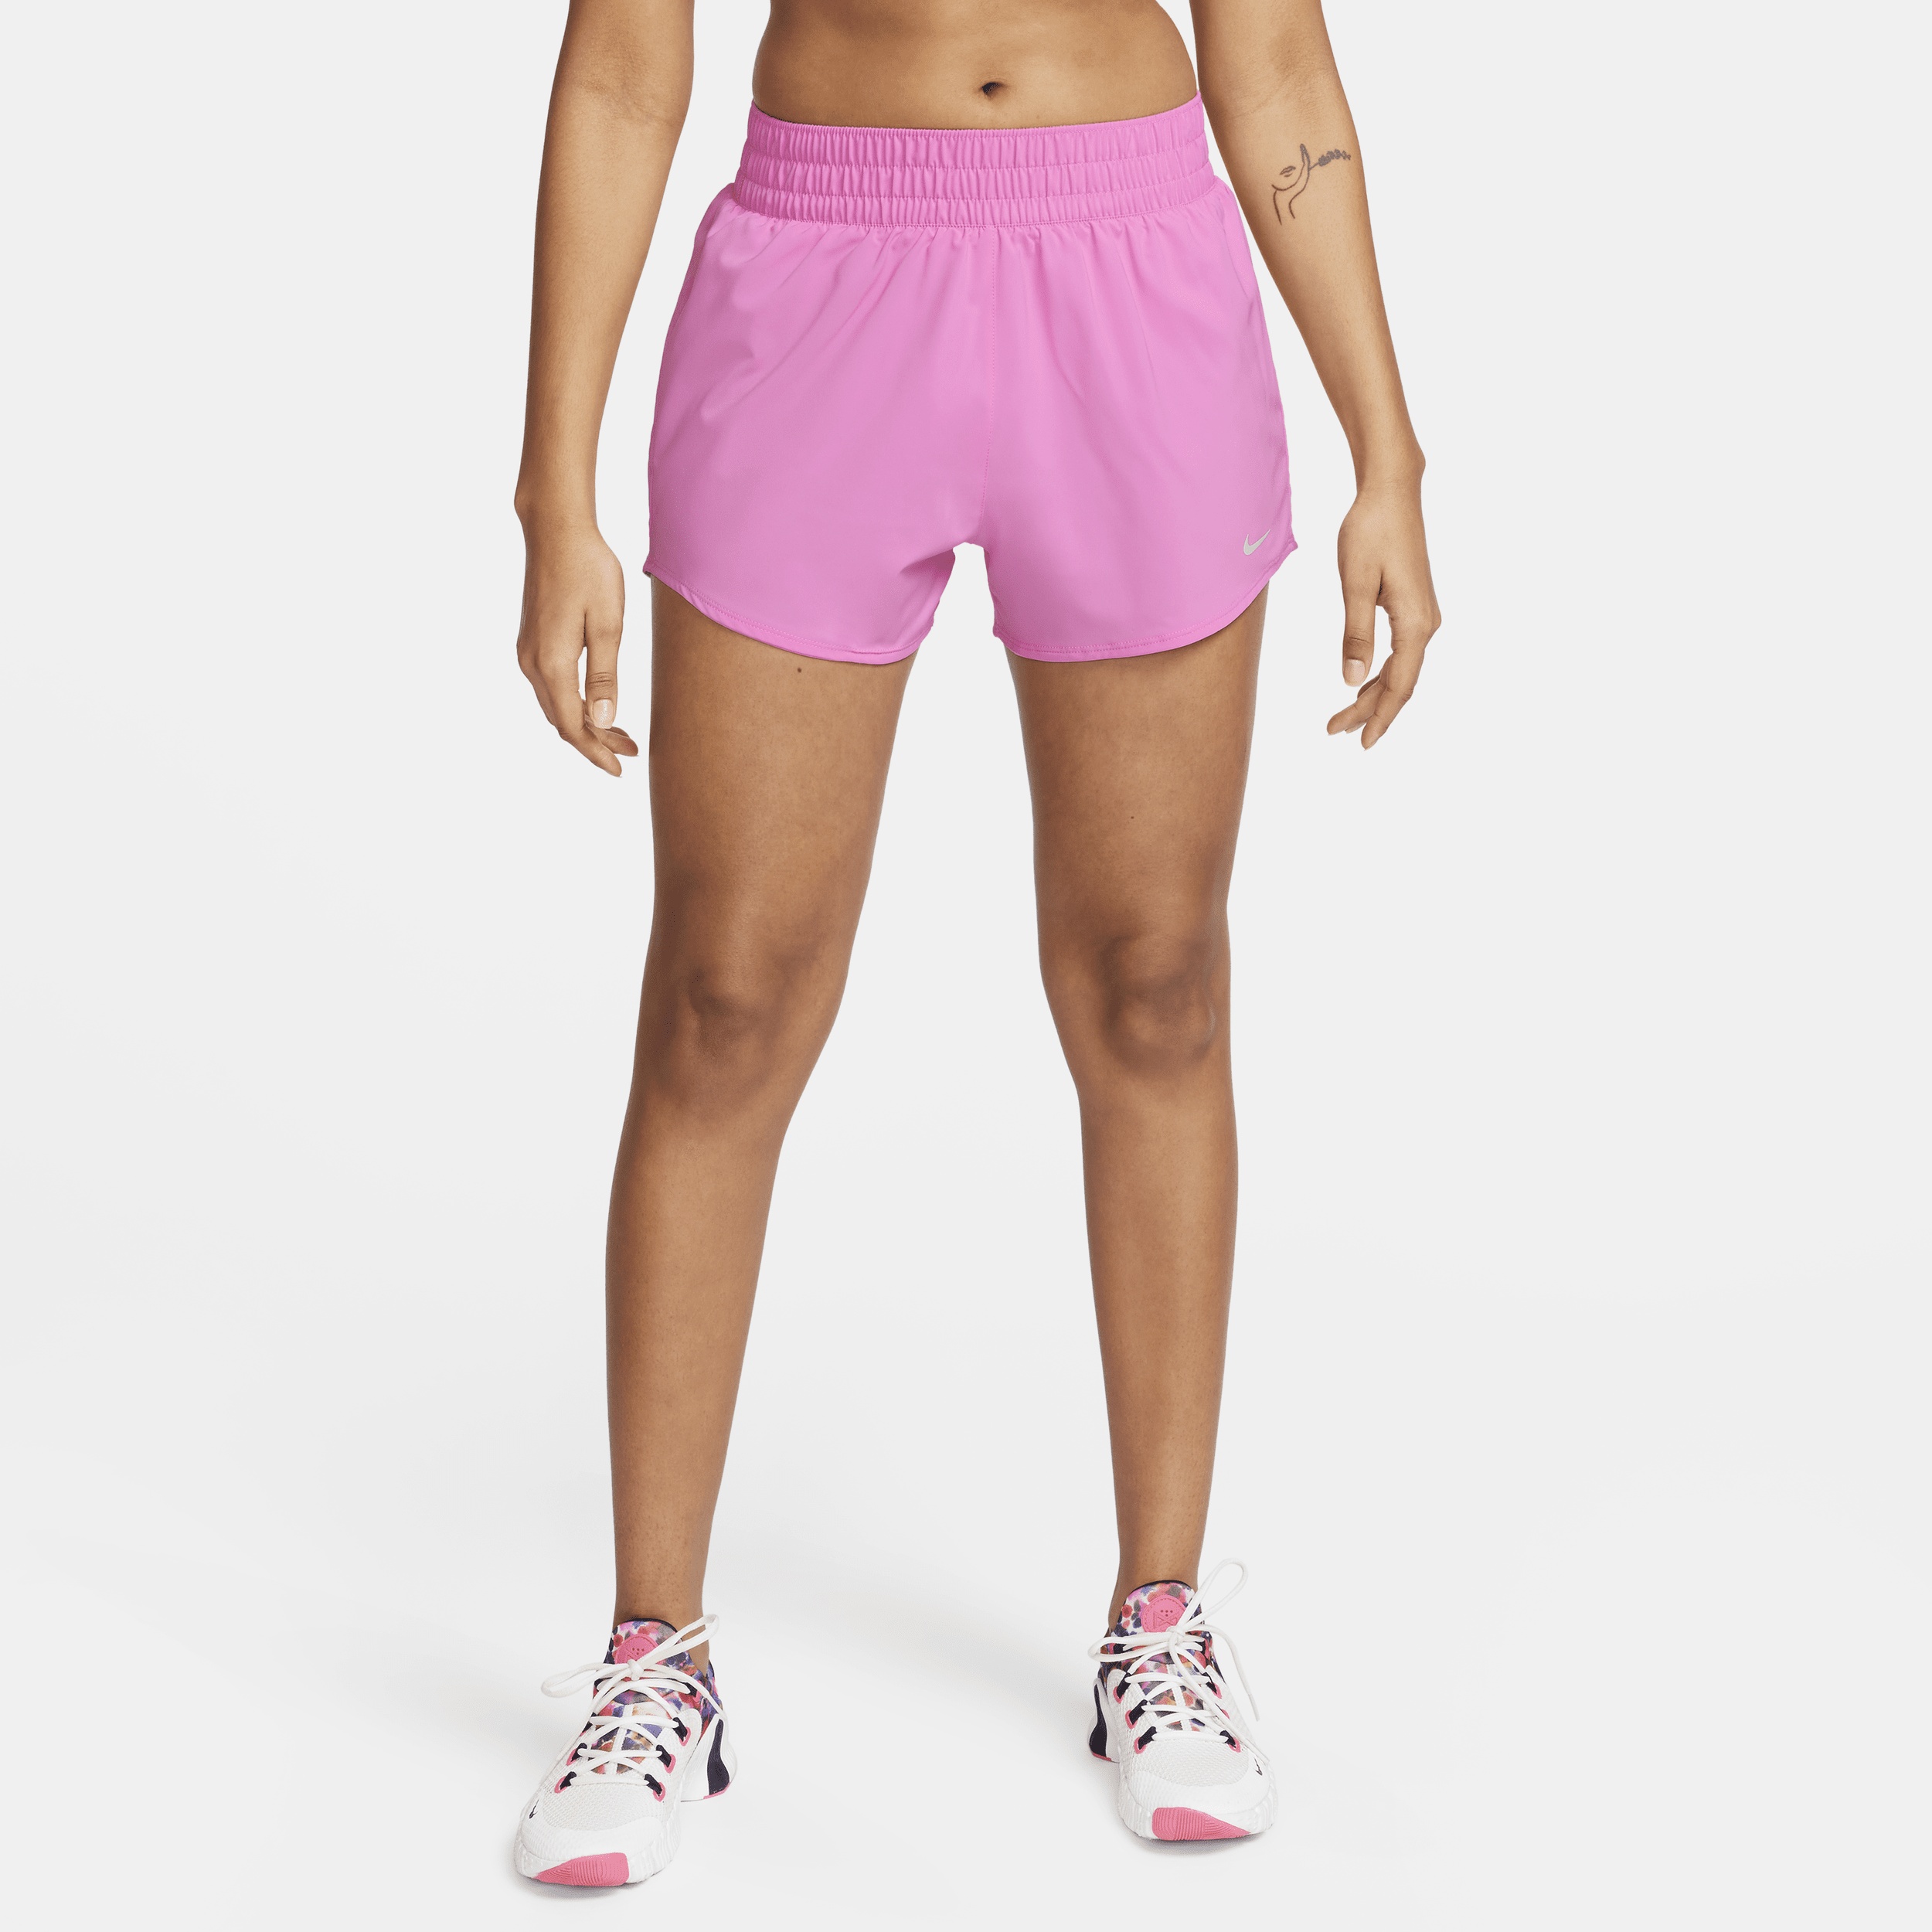 Nike Women's One Dri-FIT High-Waisted 3" Brief-Lined Shorts - 1